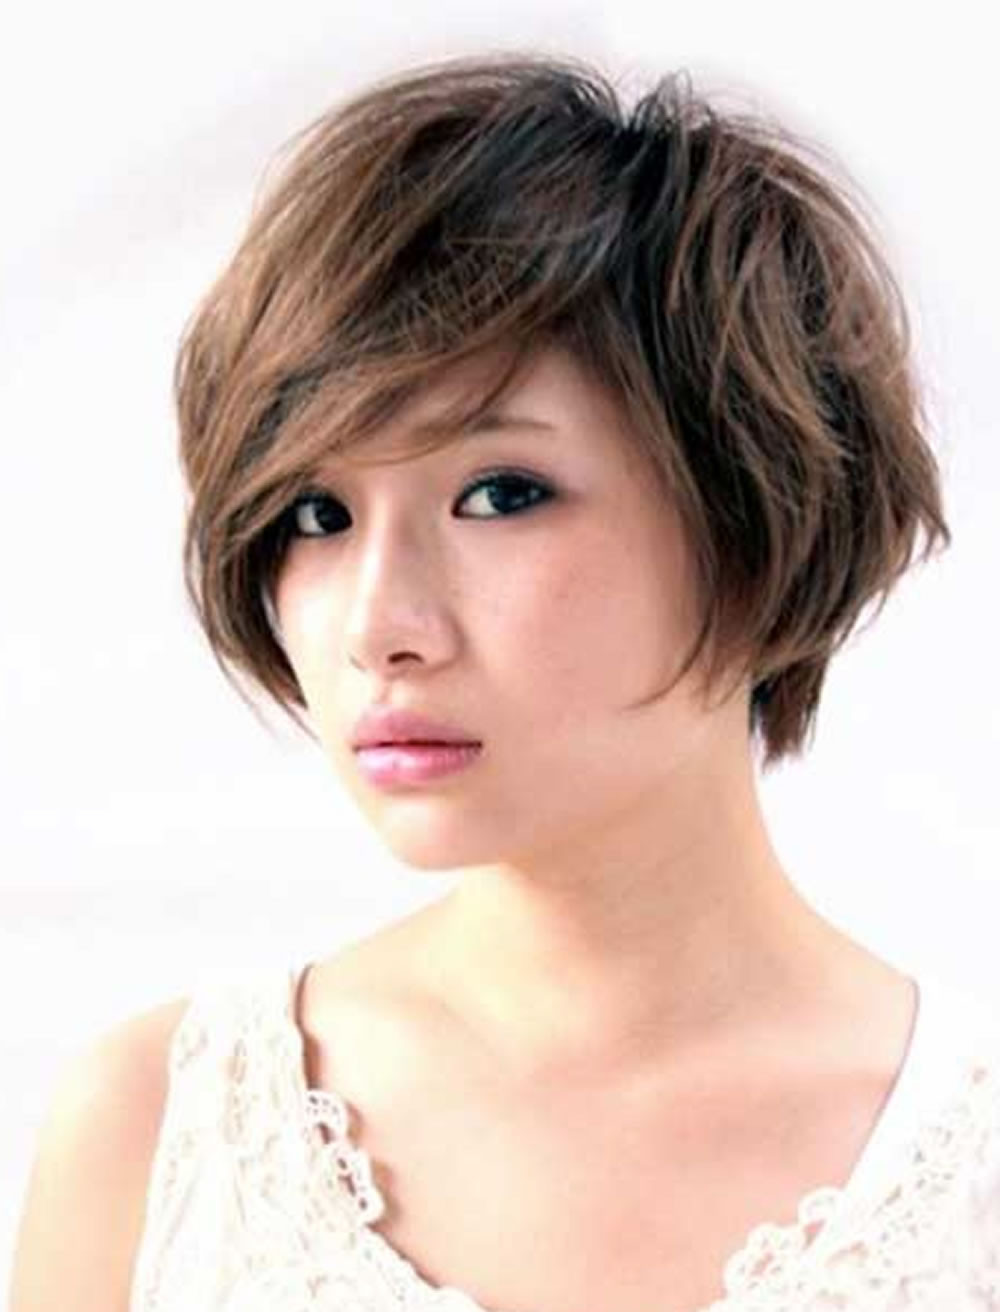 Girls Short Haircuts 2019
 50 Glorious Short Hairstyles for Asian Women for Summer